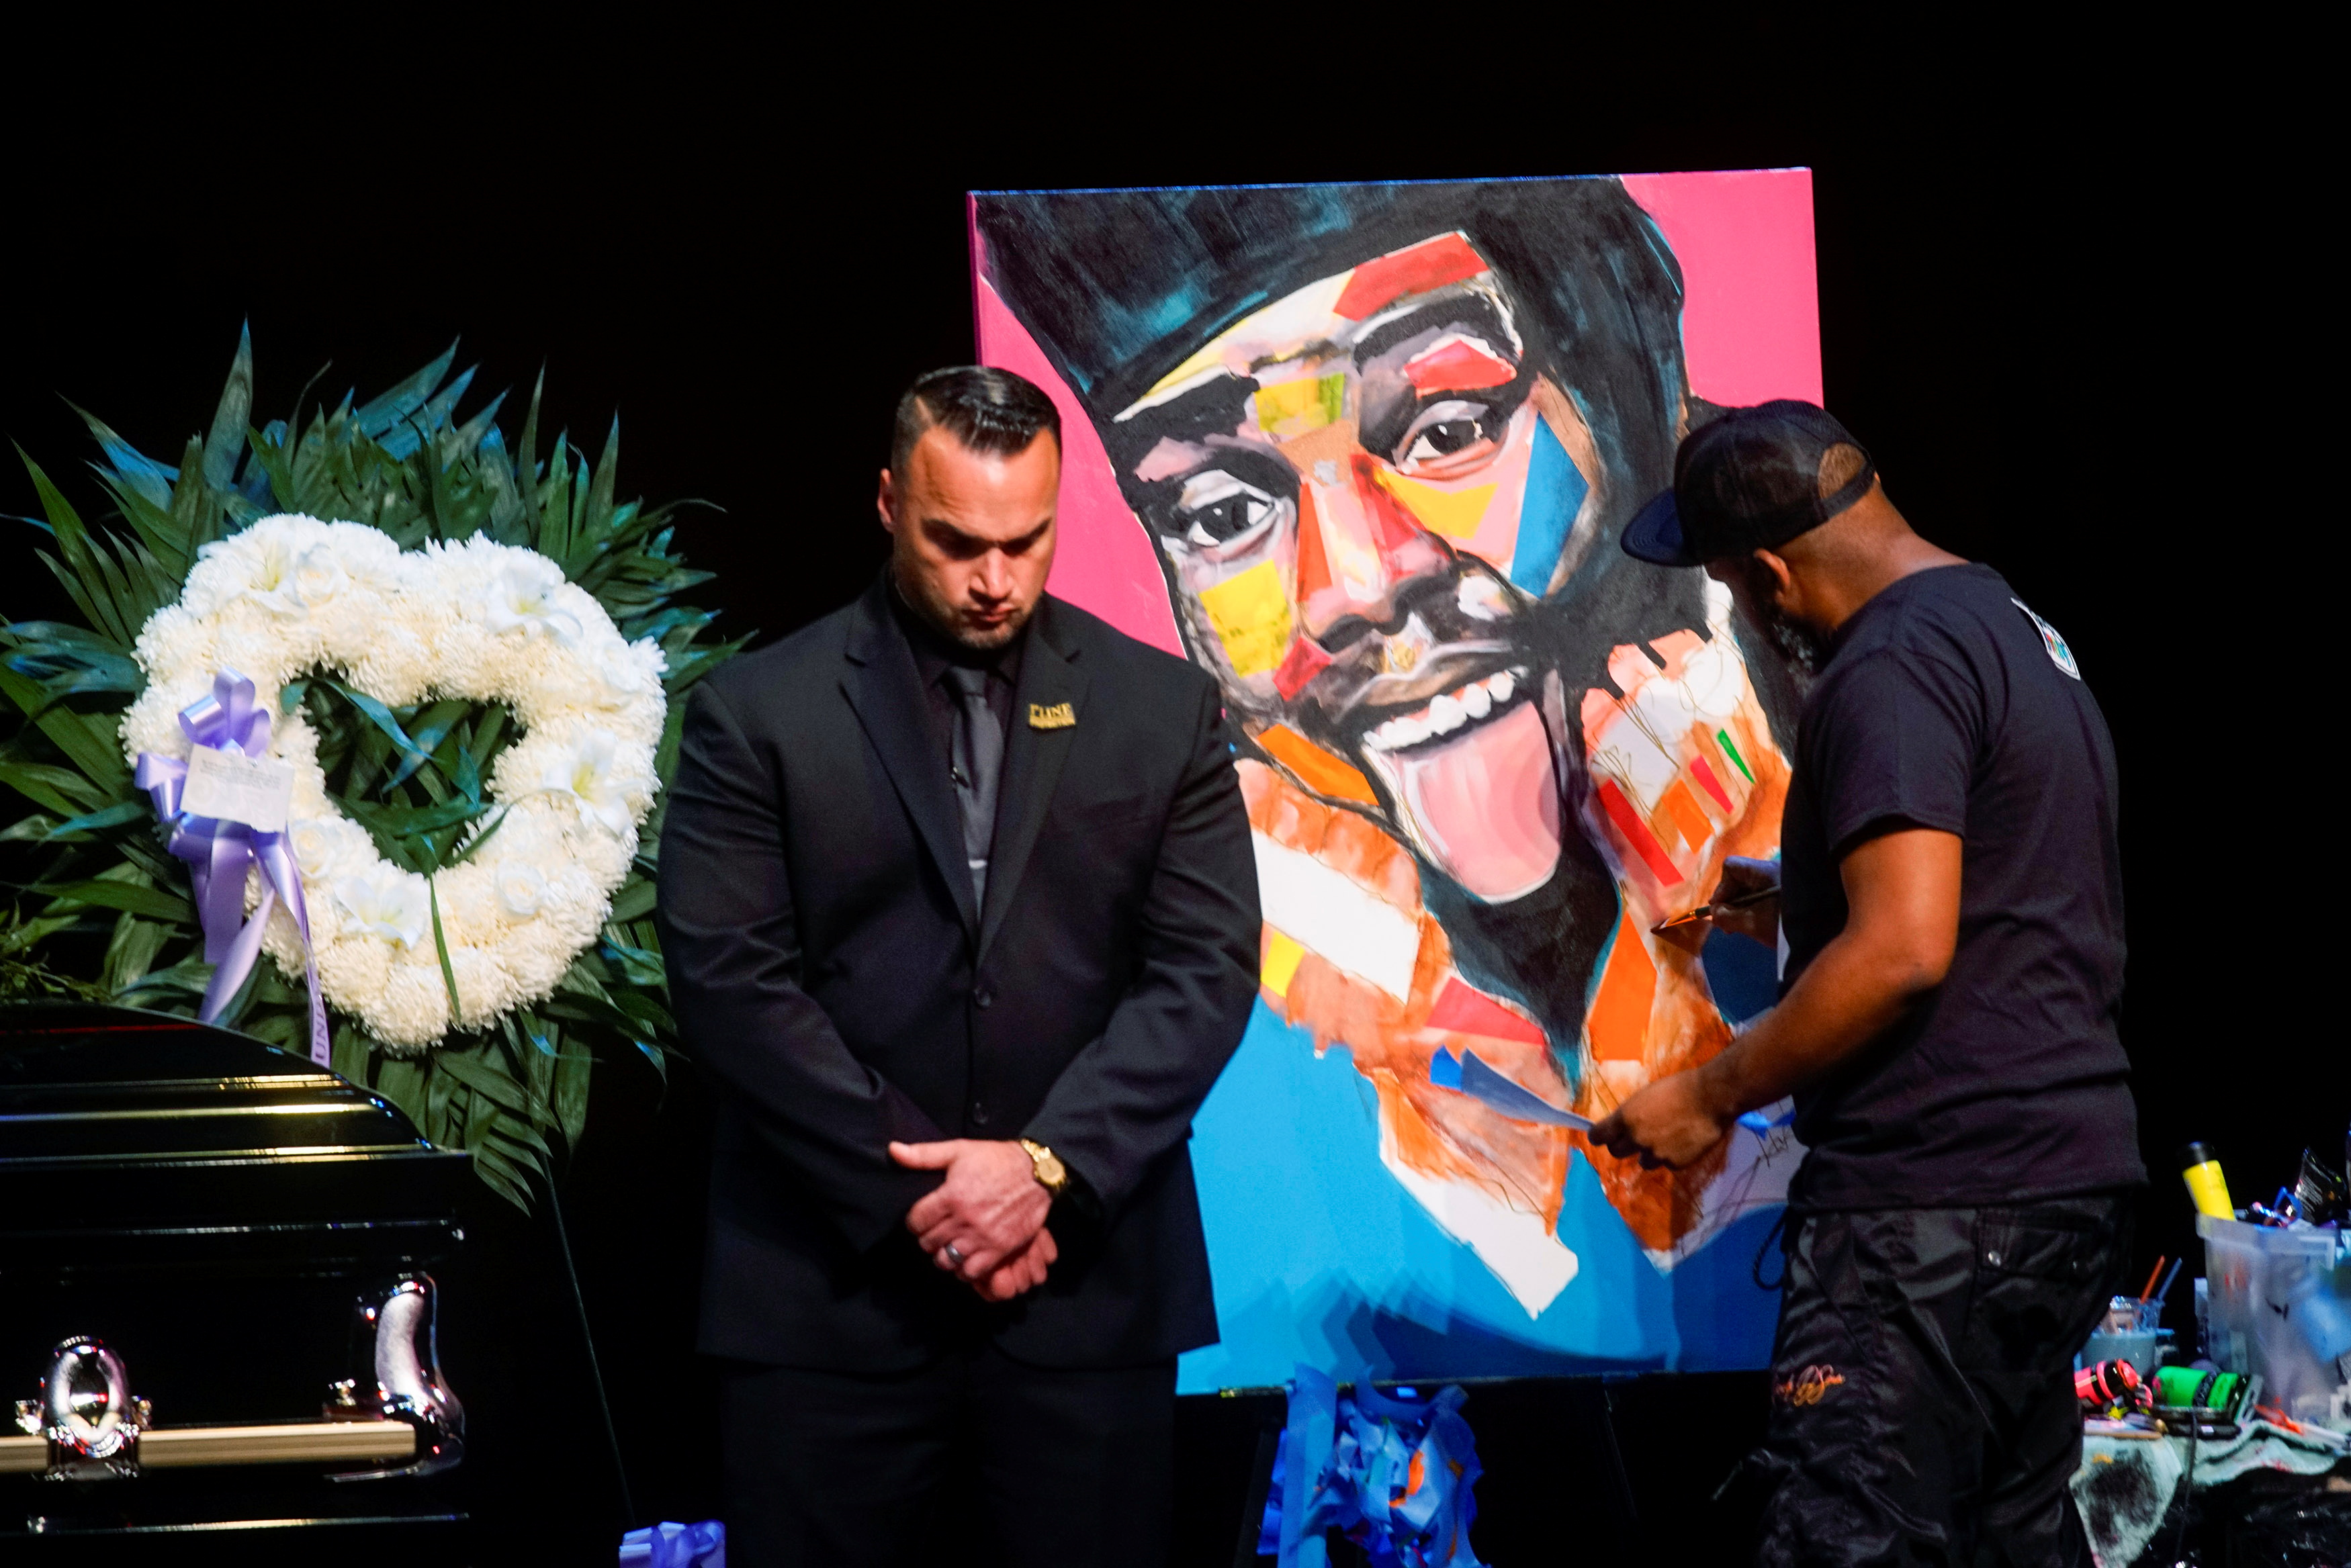 An artist paints a portrait for late rapper Marcel Theo Hall, known by his stage name Biz Markie, next to his casket during the funeral service in Patchogue